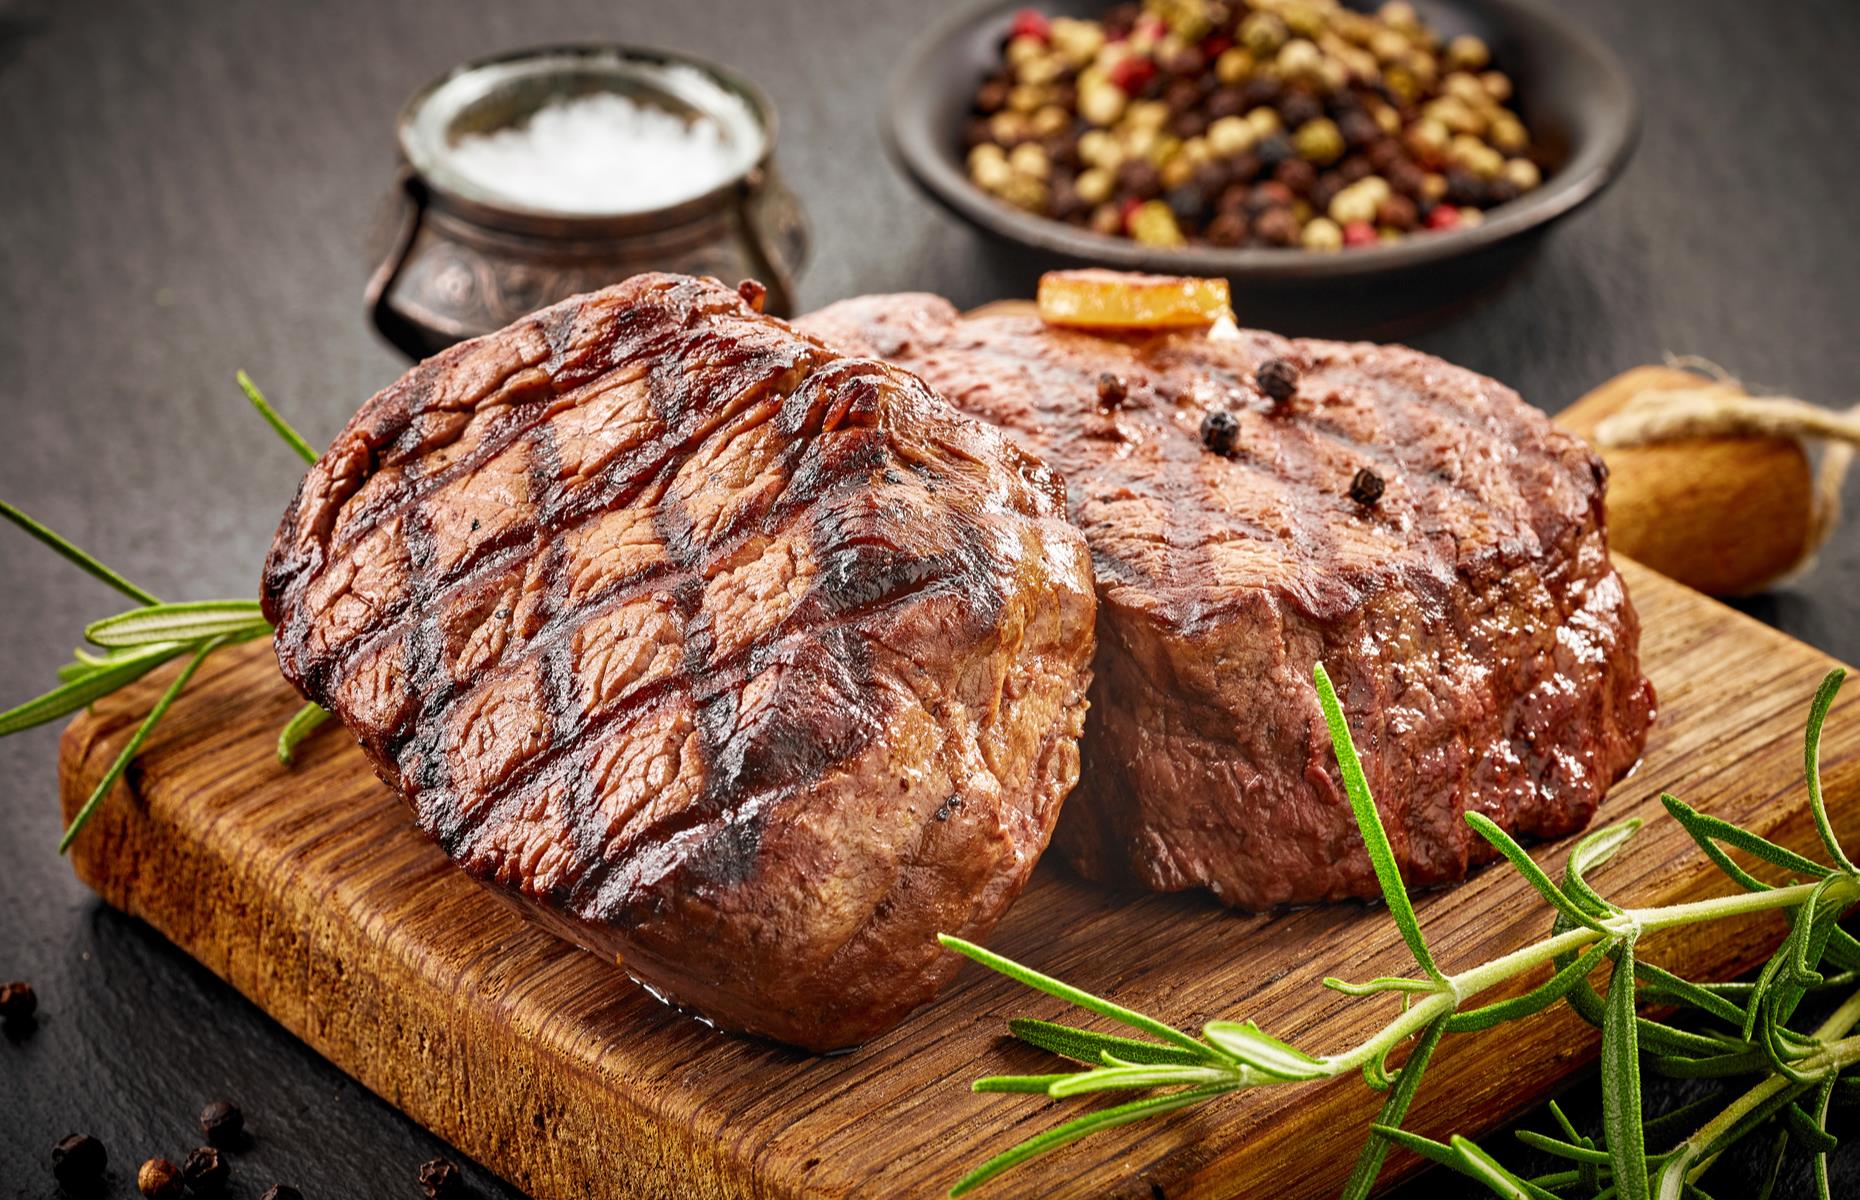 <p>For the perfect steak, Nigella always cooks the meat over a very high heat for a short time, just until the outside is charred and crisp. She then rests it under foil for around 10-15 minutes, without slicing or touching it, before sprinkling with sea salt and serving.</p>